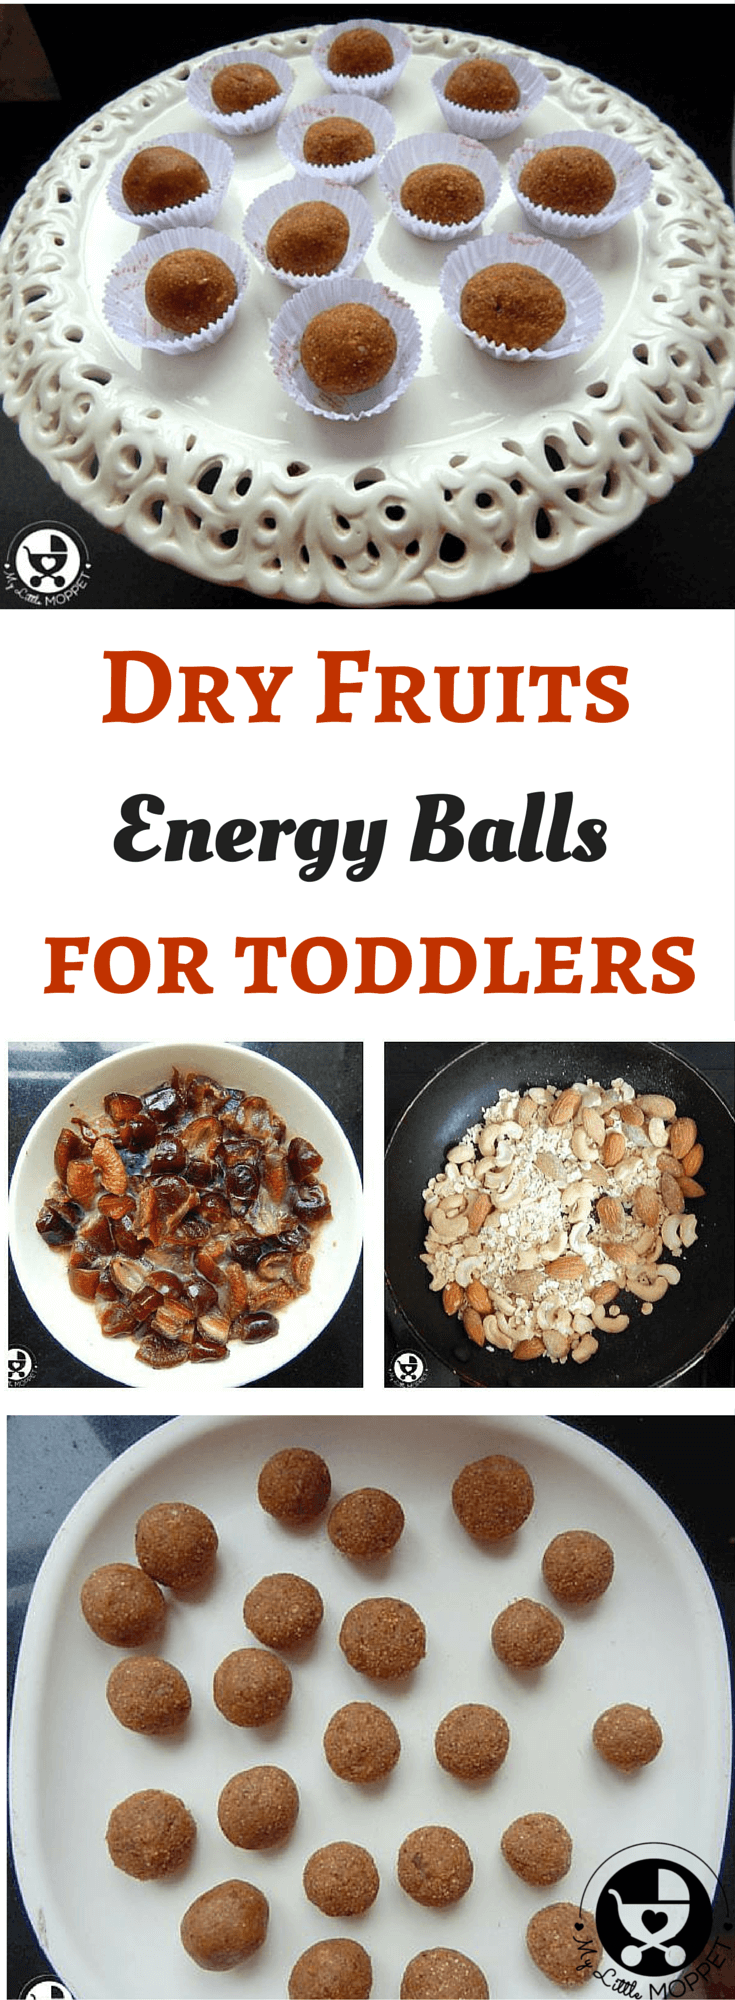 Dry fruits balls finger food recipe for toddlers